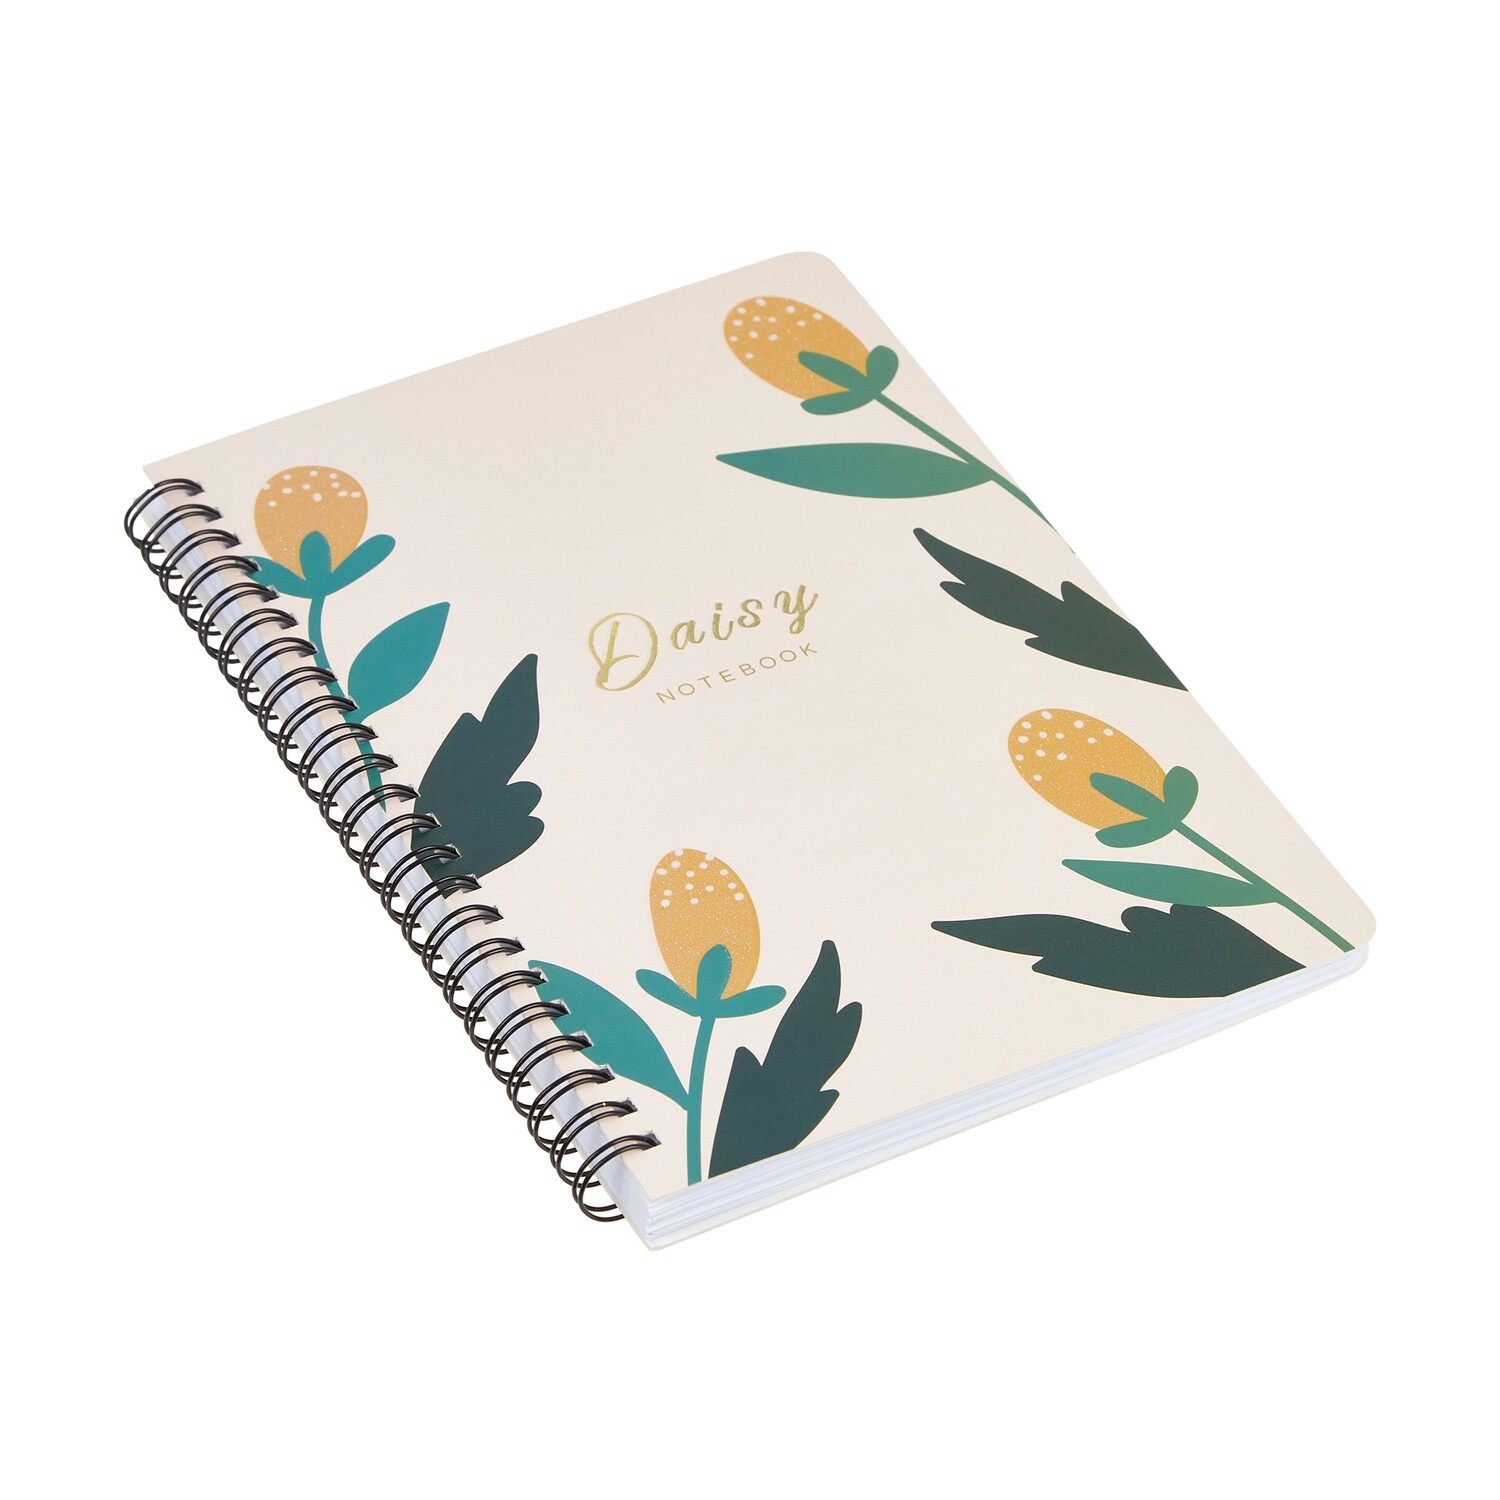 Daisy - A5 Spiral Lined Notebook